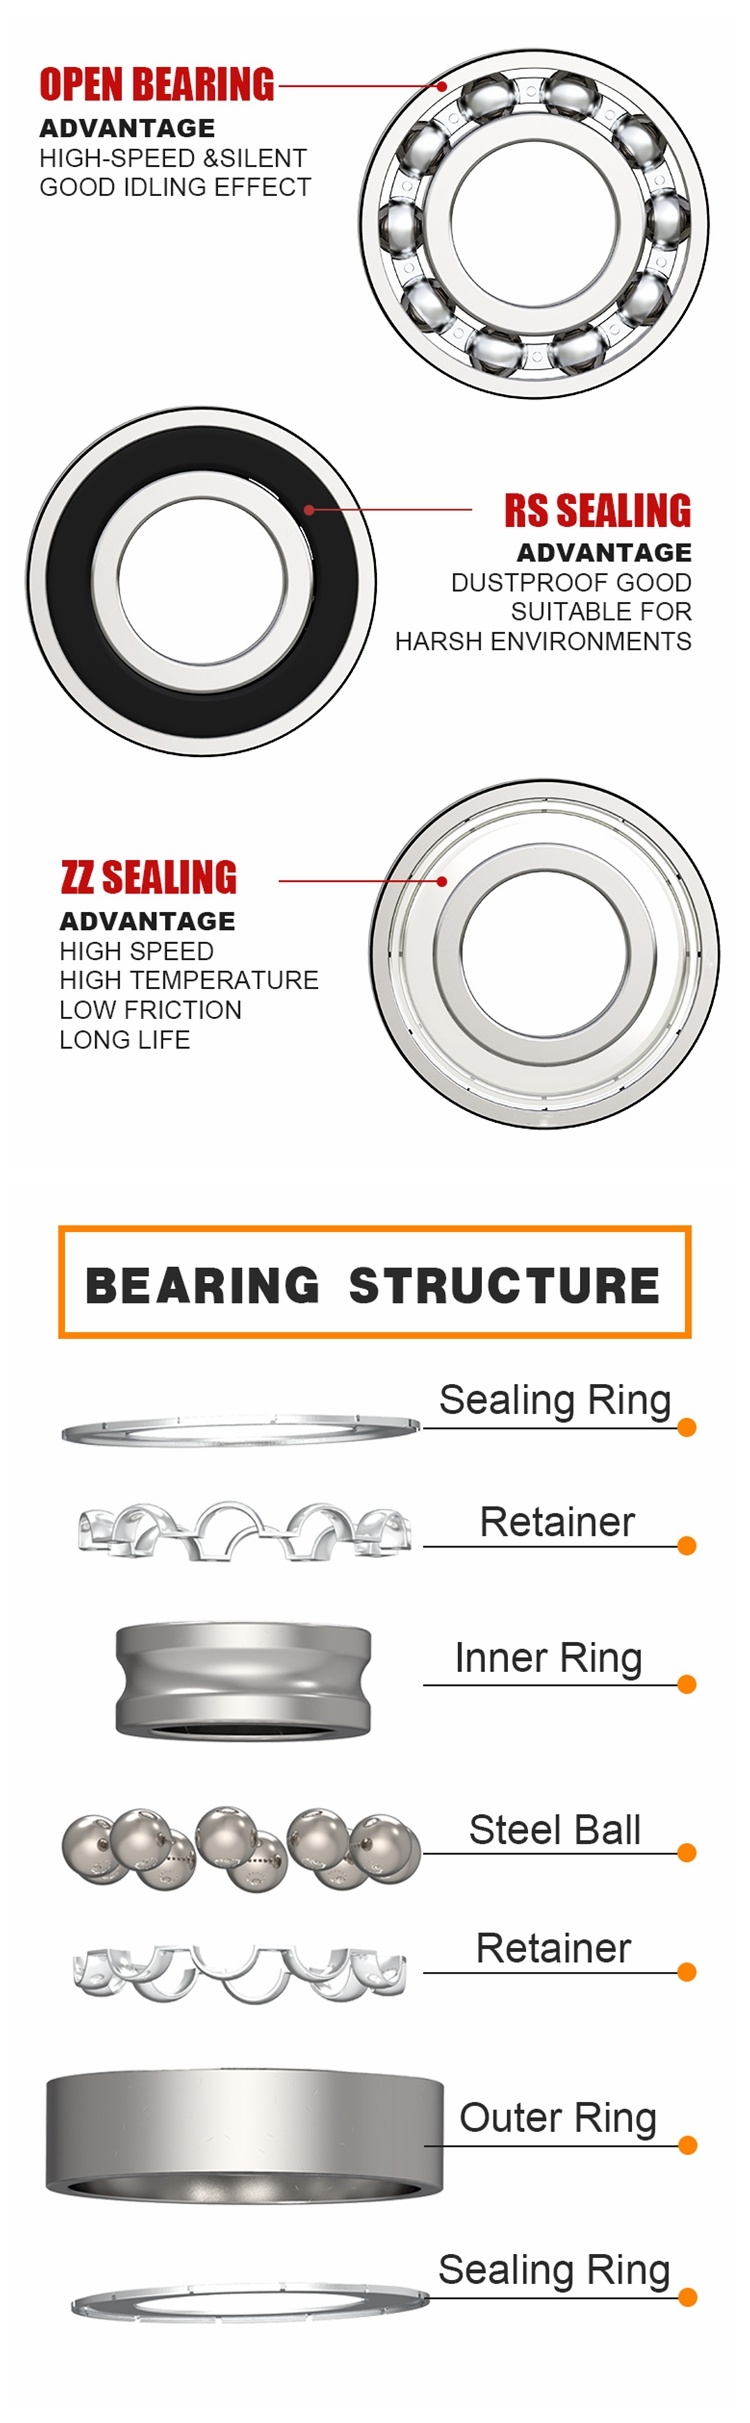 ABEC-1 Auto Parts Z2 V2 62204 RS Widen Deep Groove Ball Bearings